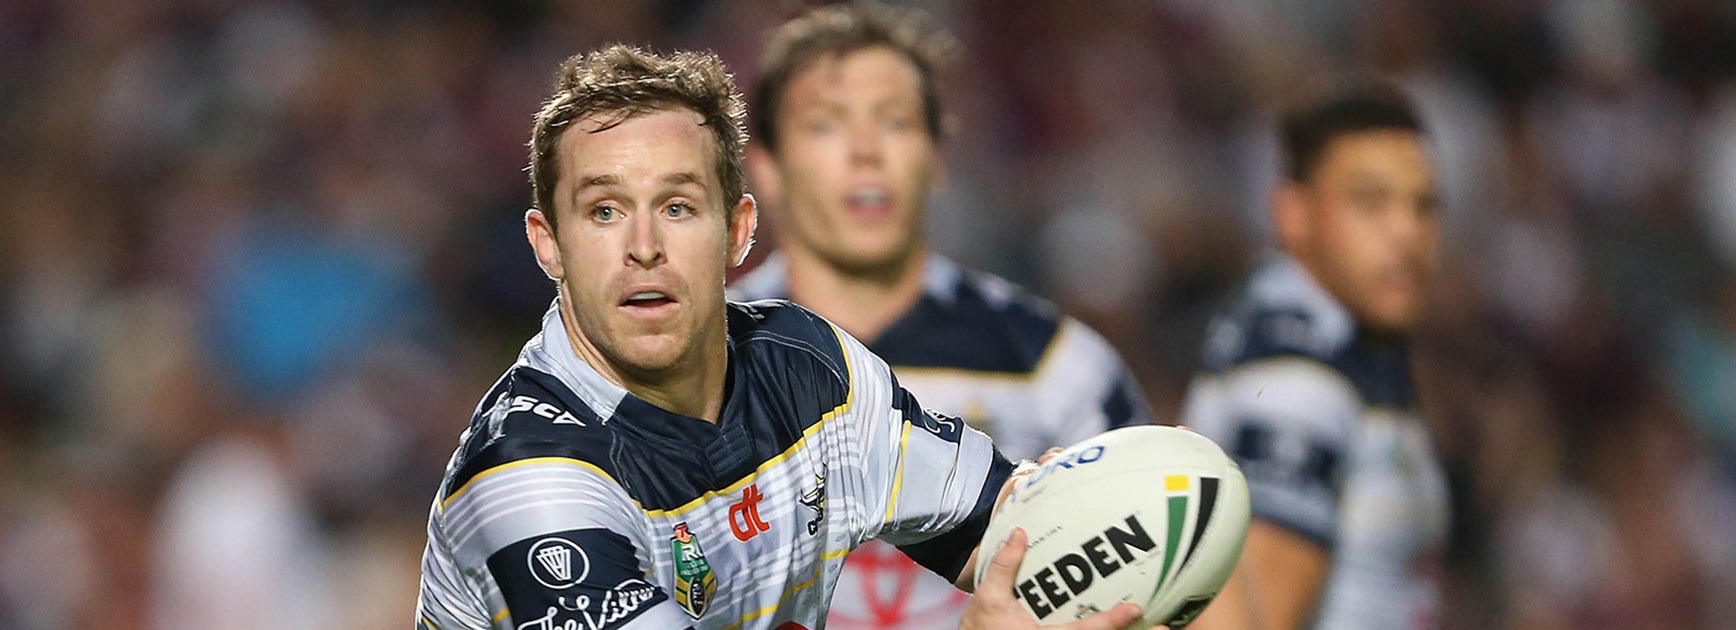 Cowboys five-eighth Michael Morgan starred against Manly in Round 9 of the Telstra Premiership.